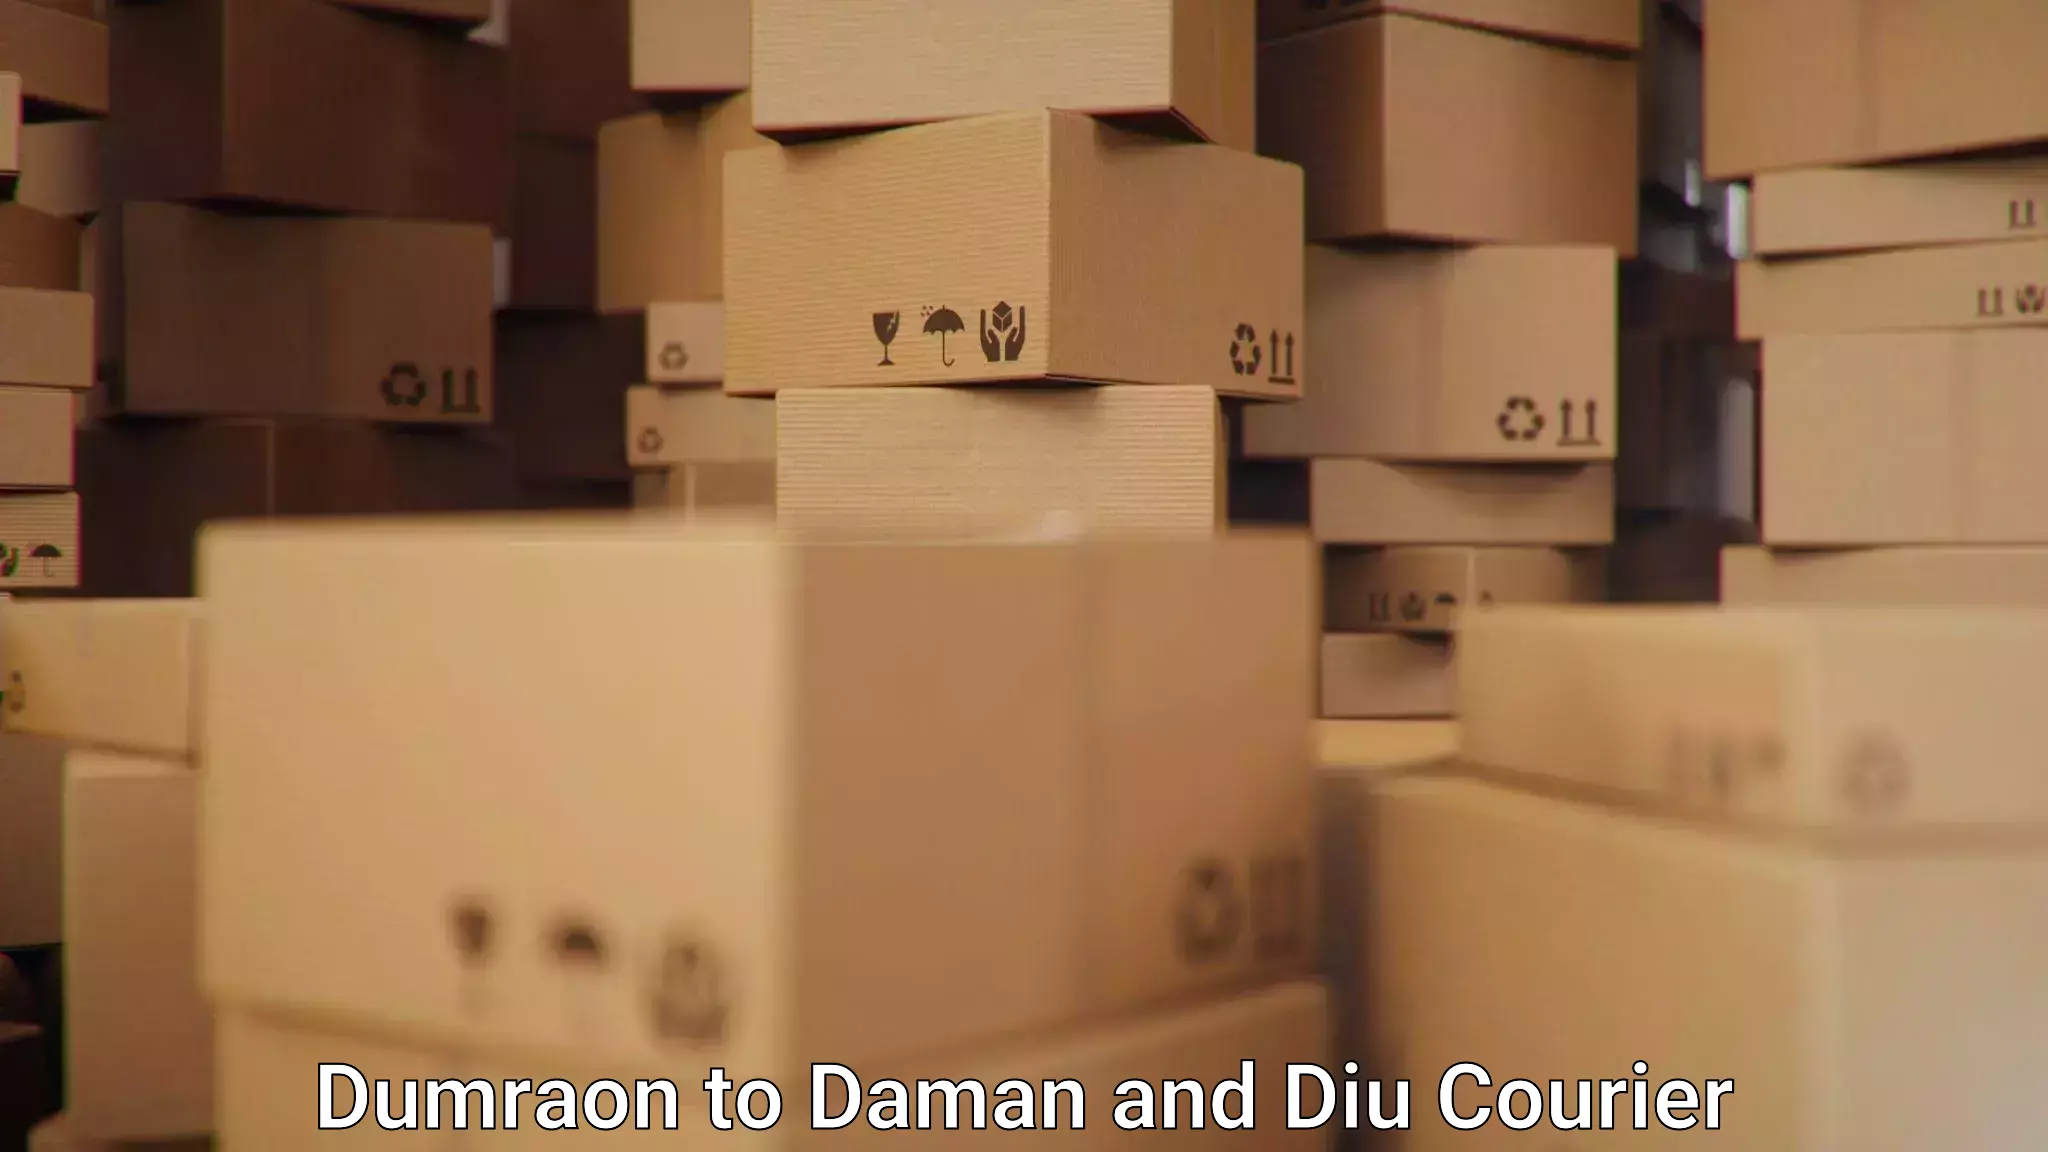 Multi-service courier options Dumraon to Diu